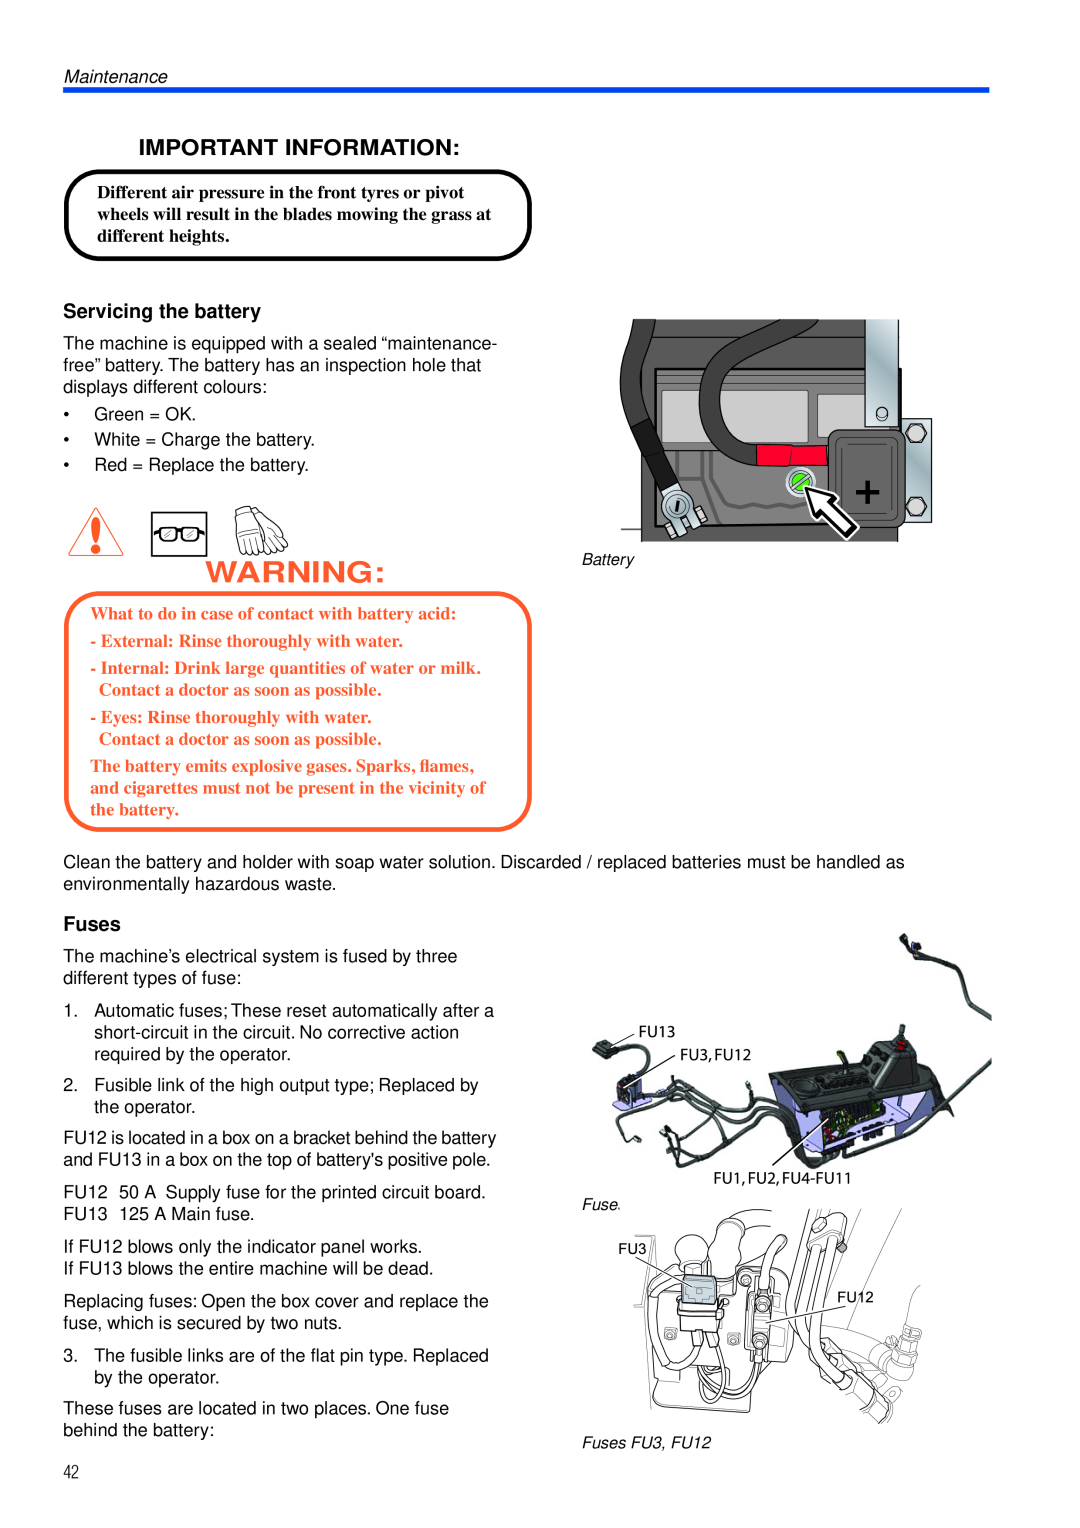 Husqvarna PT26 D Servicing the battery, Fuses, What to do in case of contact with battery acid, Important Information 